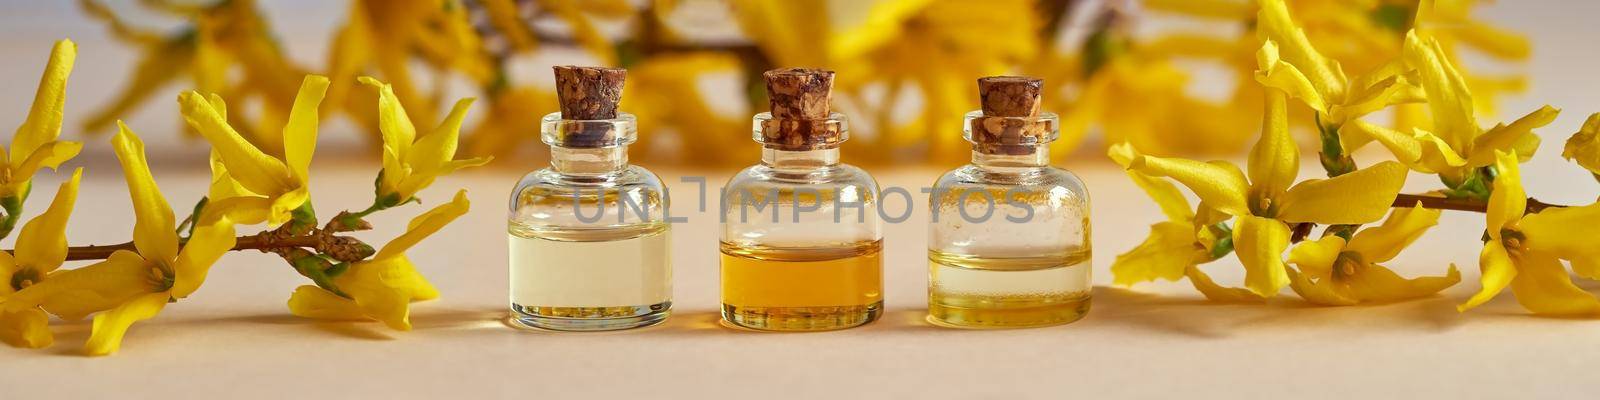 Panoramic header of essential oil bottles with yellow spring flowers - forsythias by madeleine_steinbach